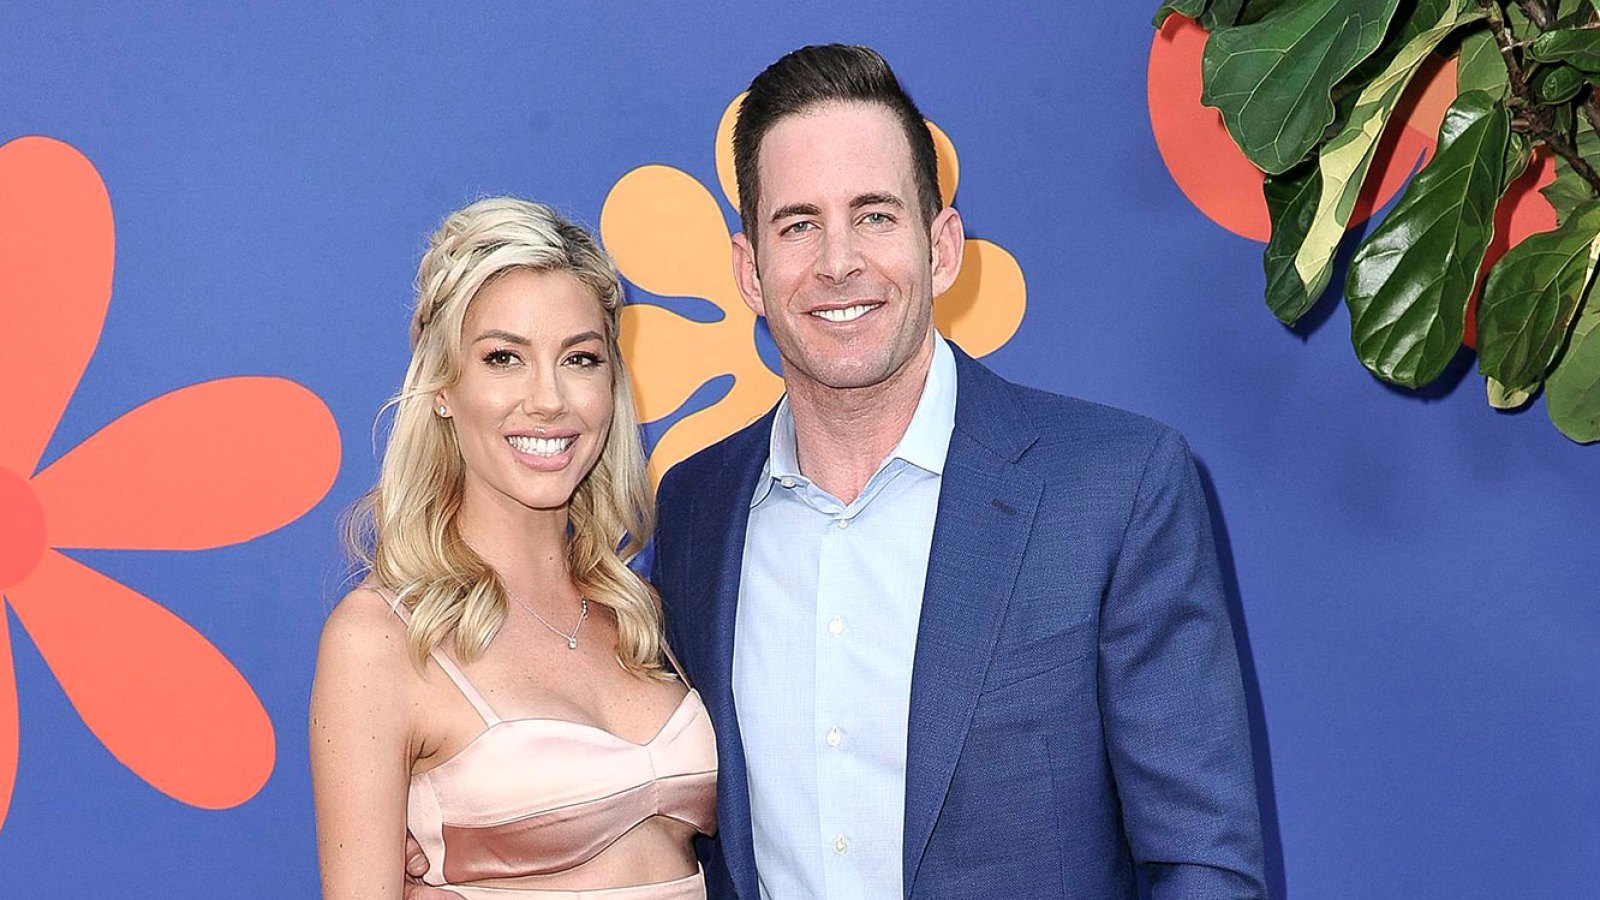 Tarek El Moussa Reveals He and Fiancee Heather Rae Young Are Open to Having More Kids